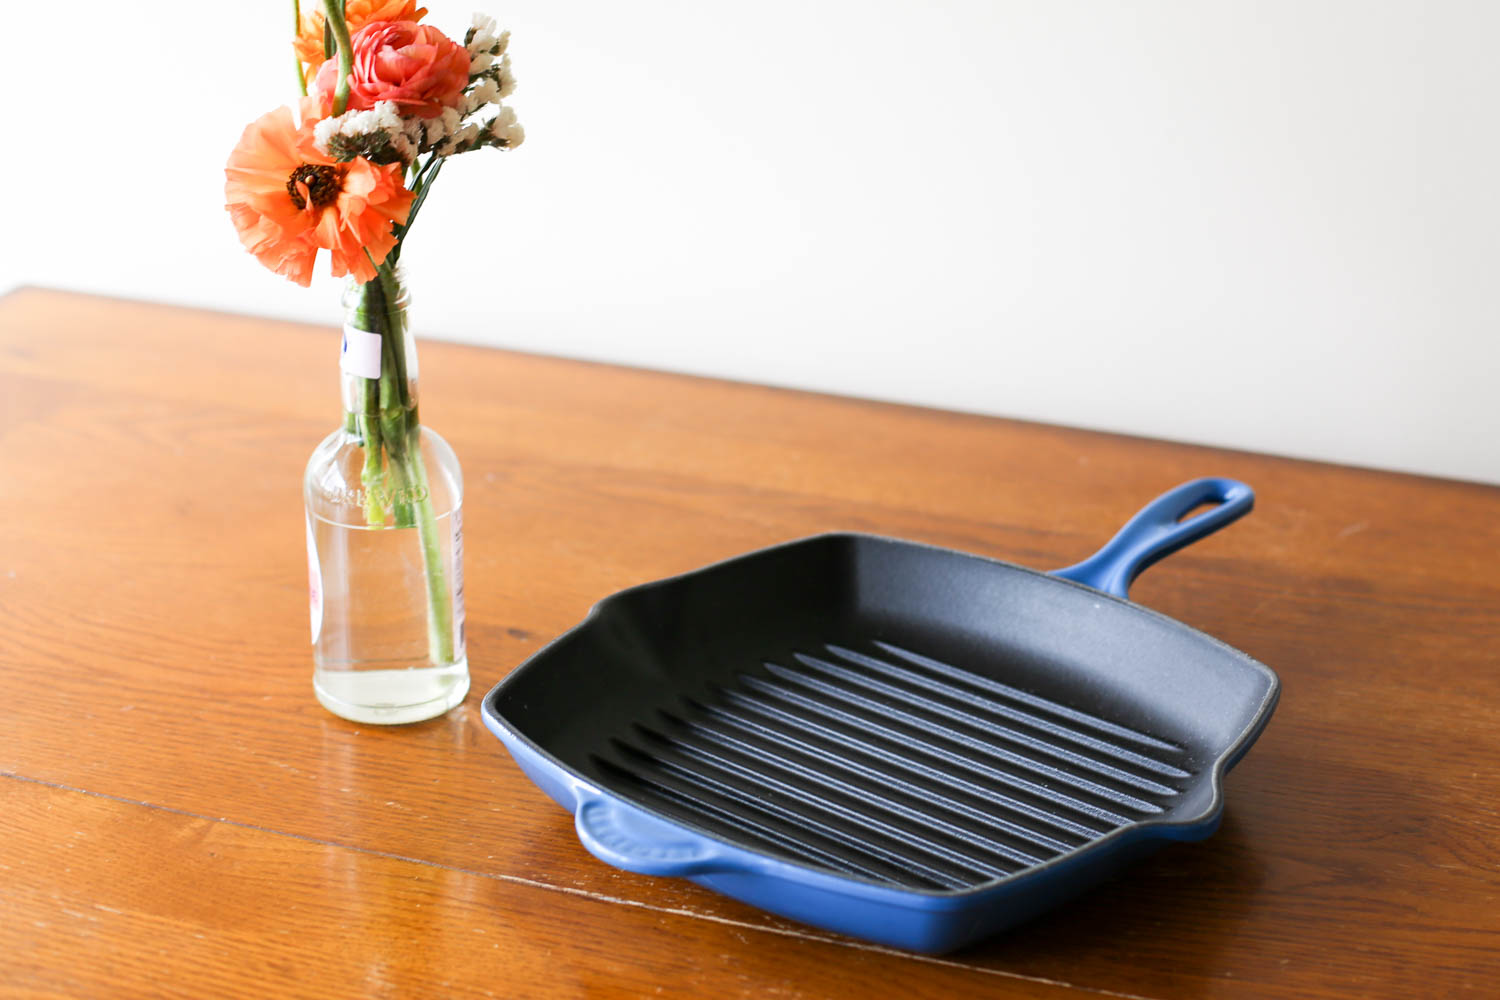 Le Creuset 26cm Square Skillet Grill, available at Nordstrom, Amazon, Sur La Table, Williams-Sonoma, The Bay, and Macy's. 